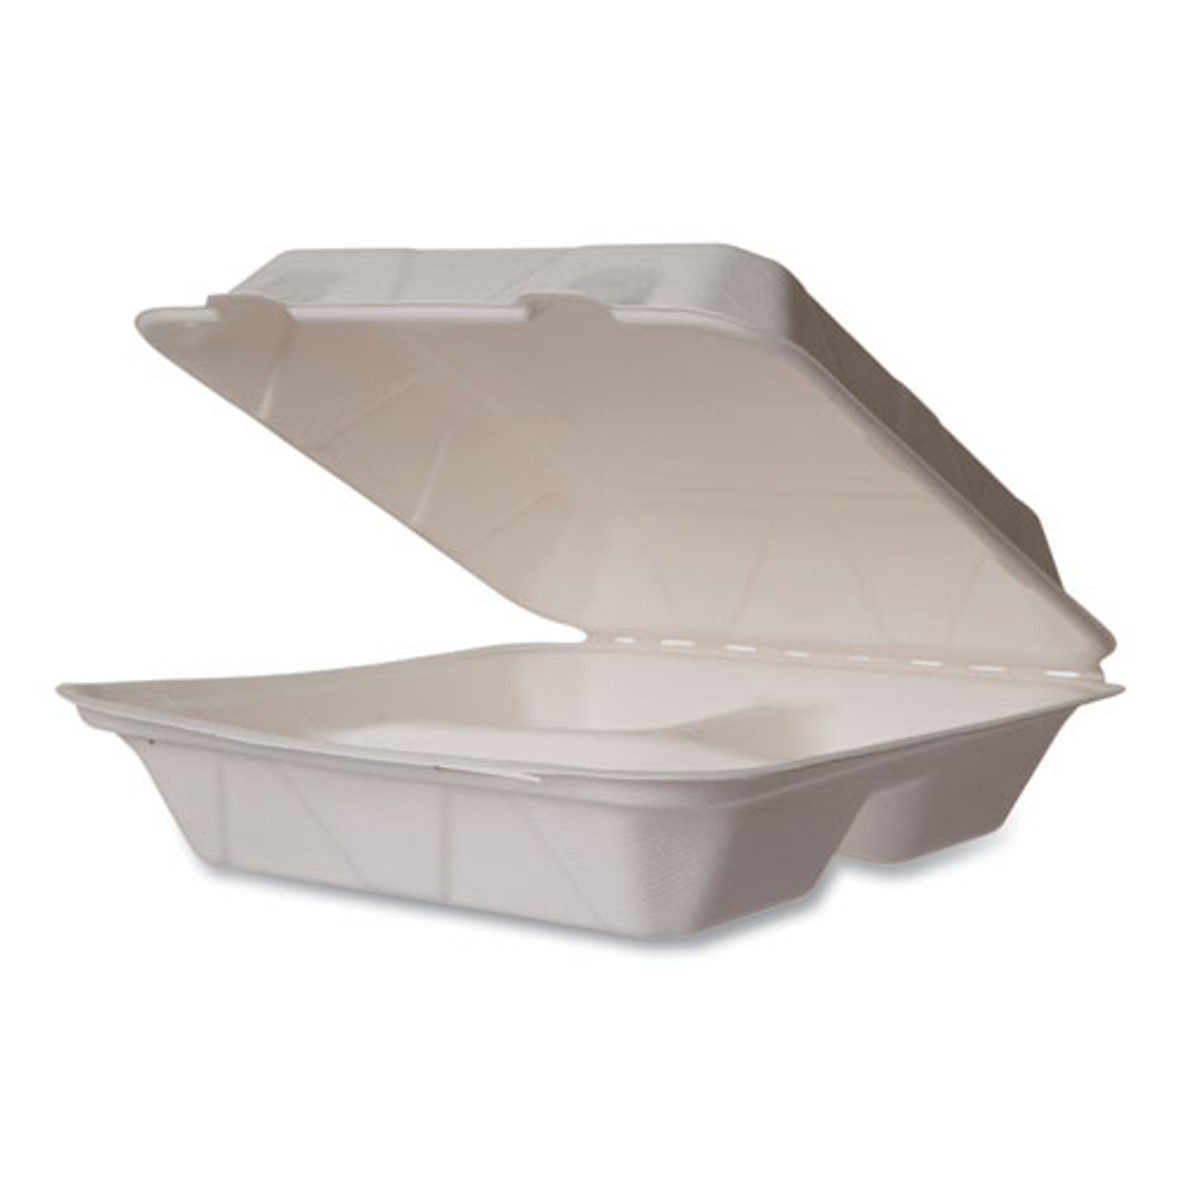 Vegware White Molded Fiber Clamshell Containers, 3-compartment, 9 X 18 X 2, White, Sugarcane, 200/carton